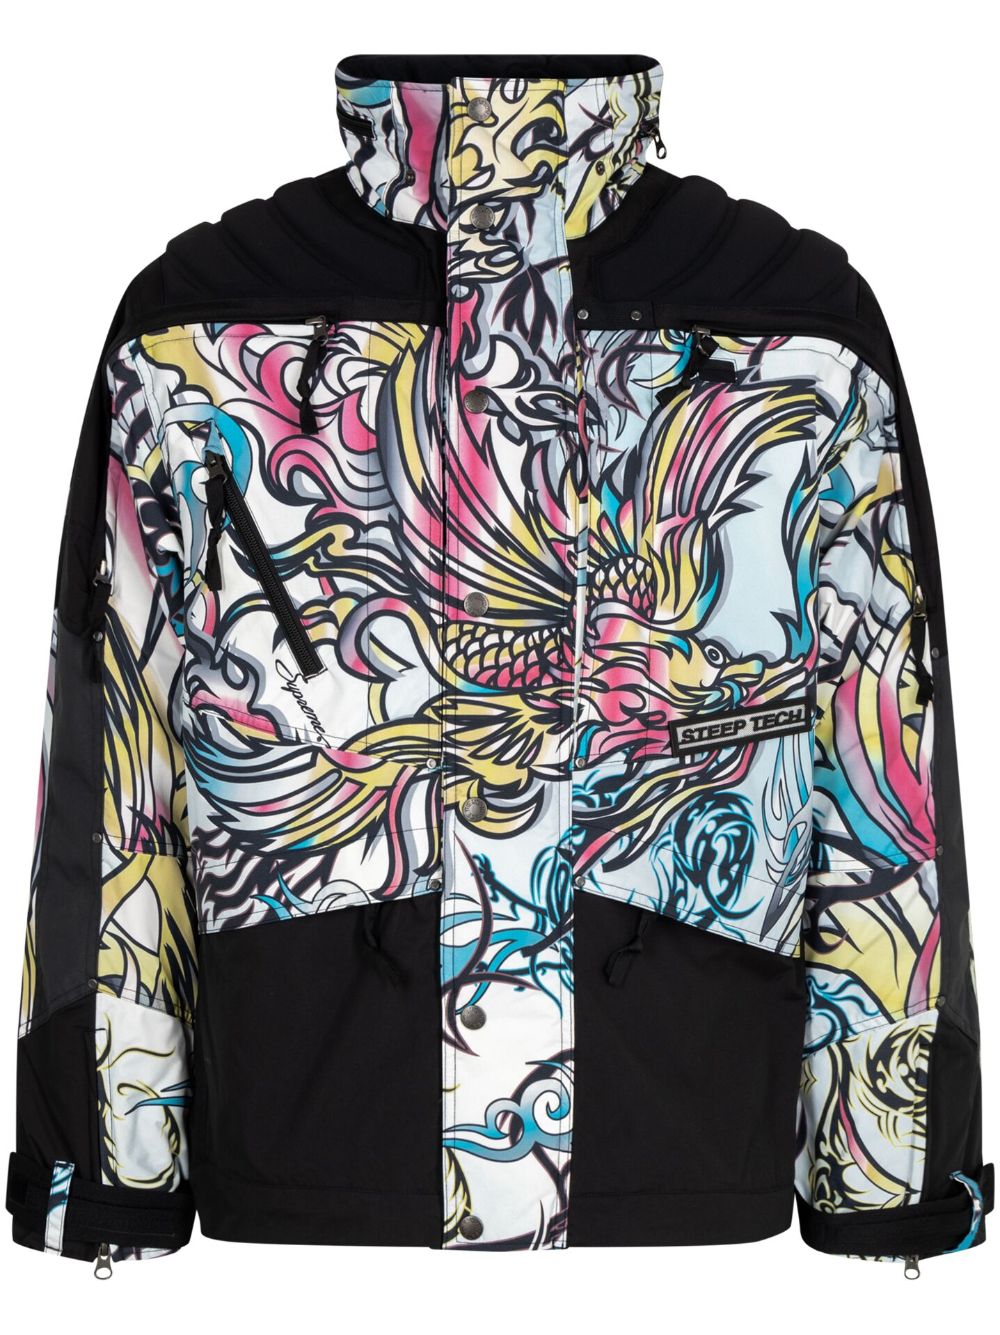 Image 1 of Supreme x The North Face Steep Tech "Multicolor Dragon" Apogee jacket